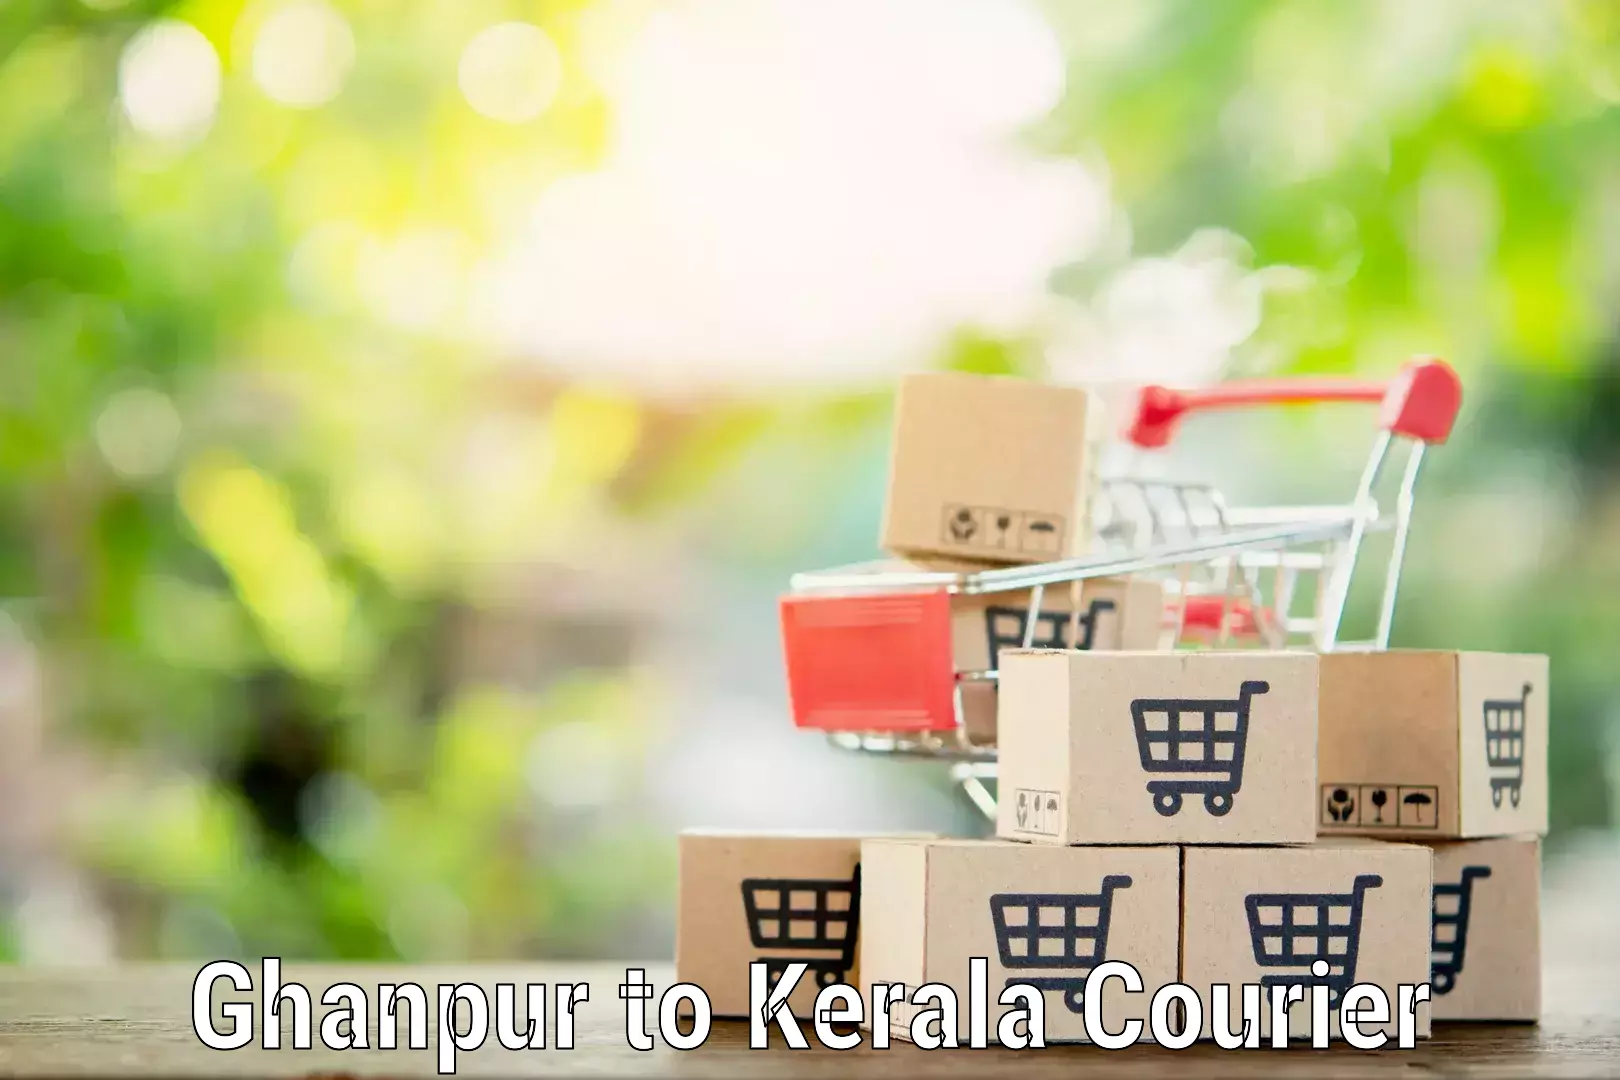 Furniture moving specialists Ghanpur to Muvattupuzha